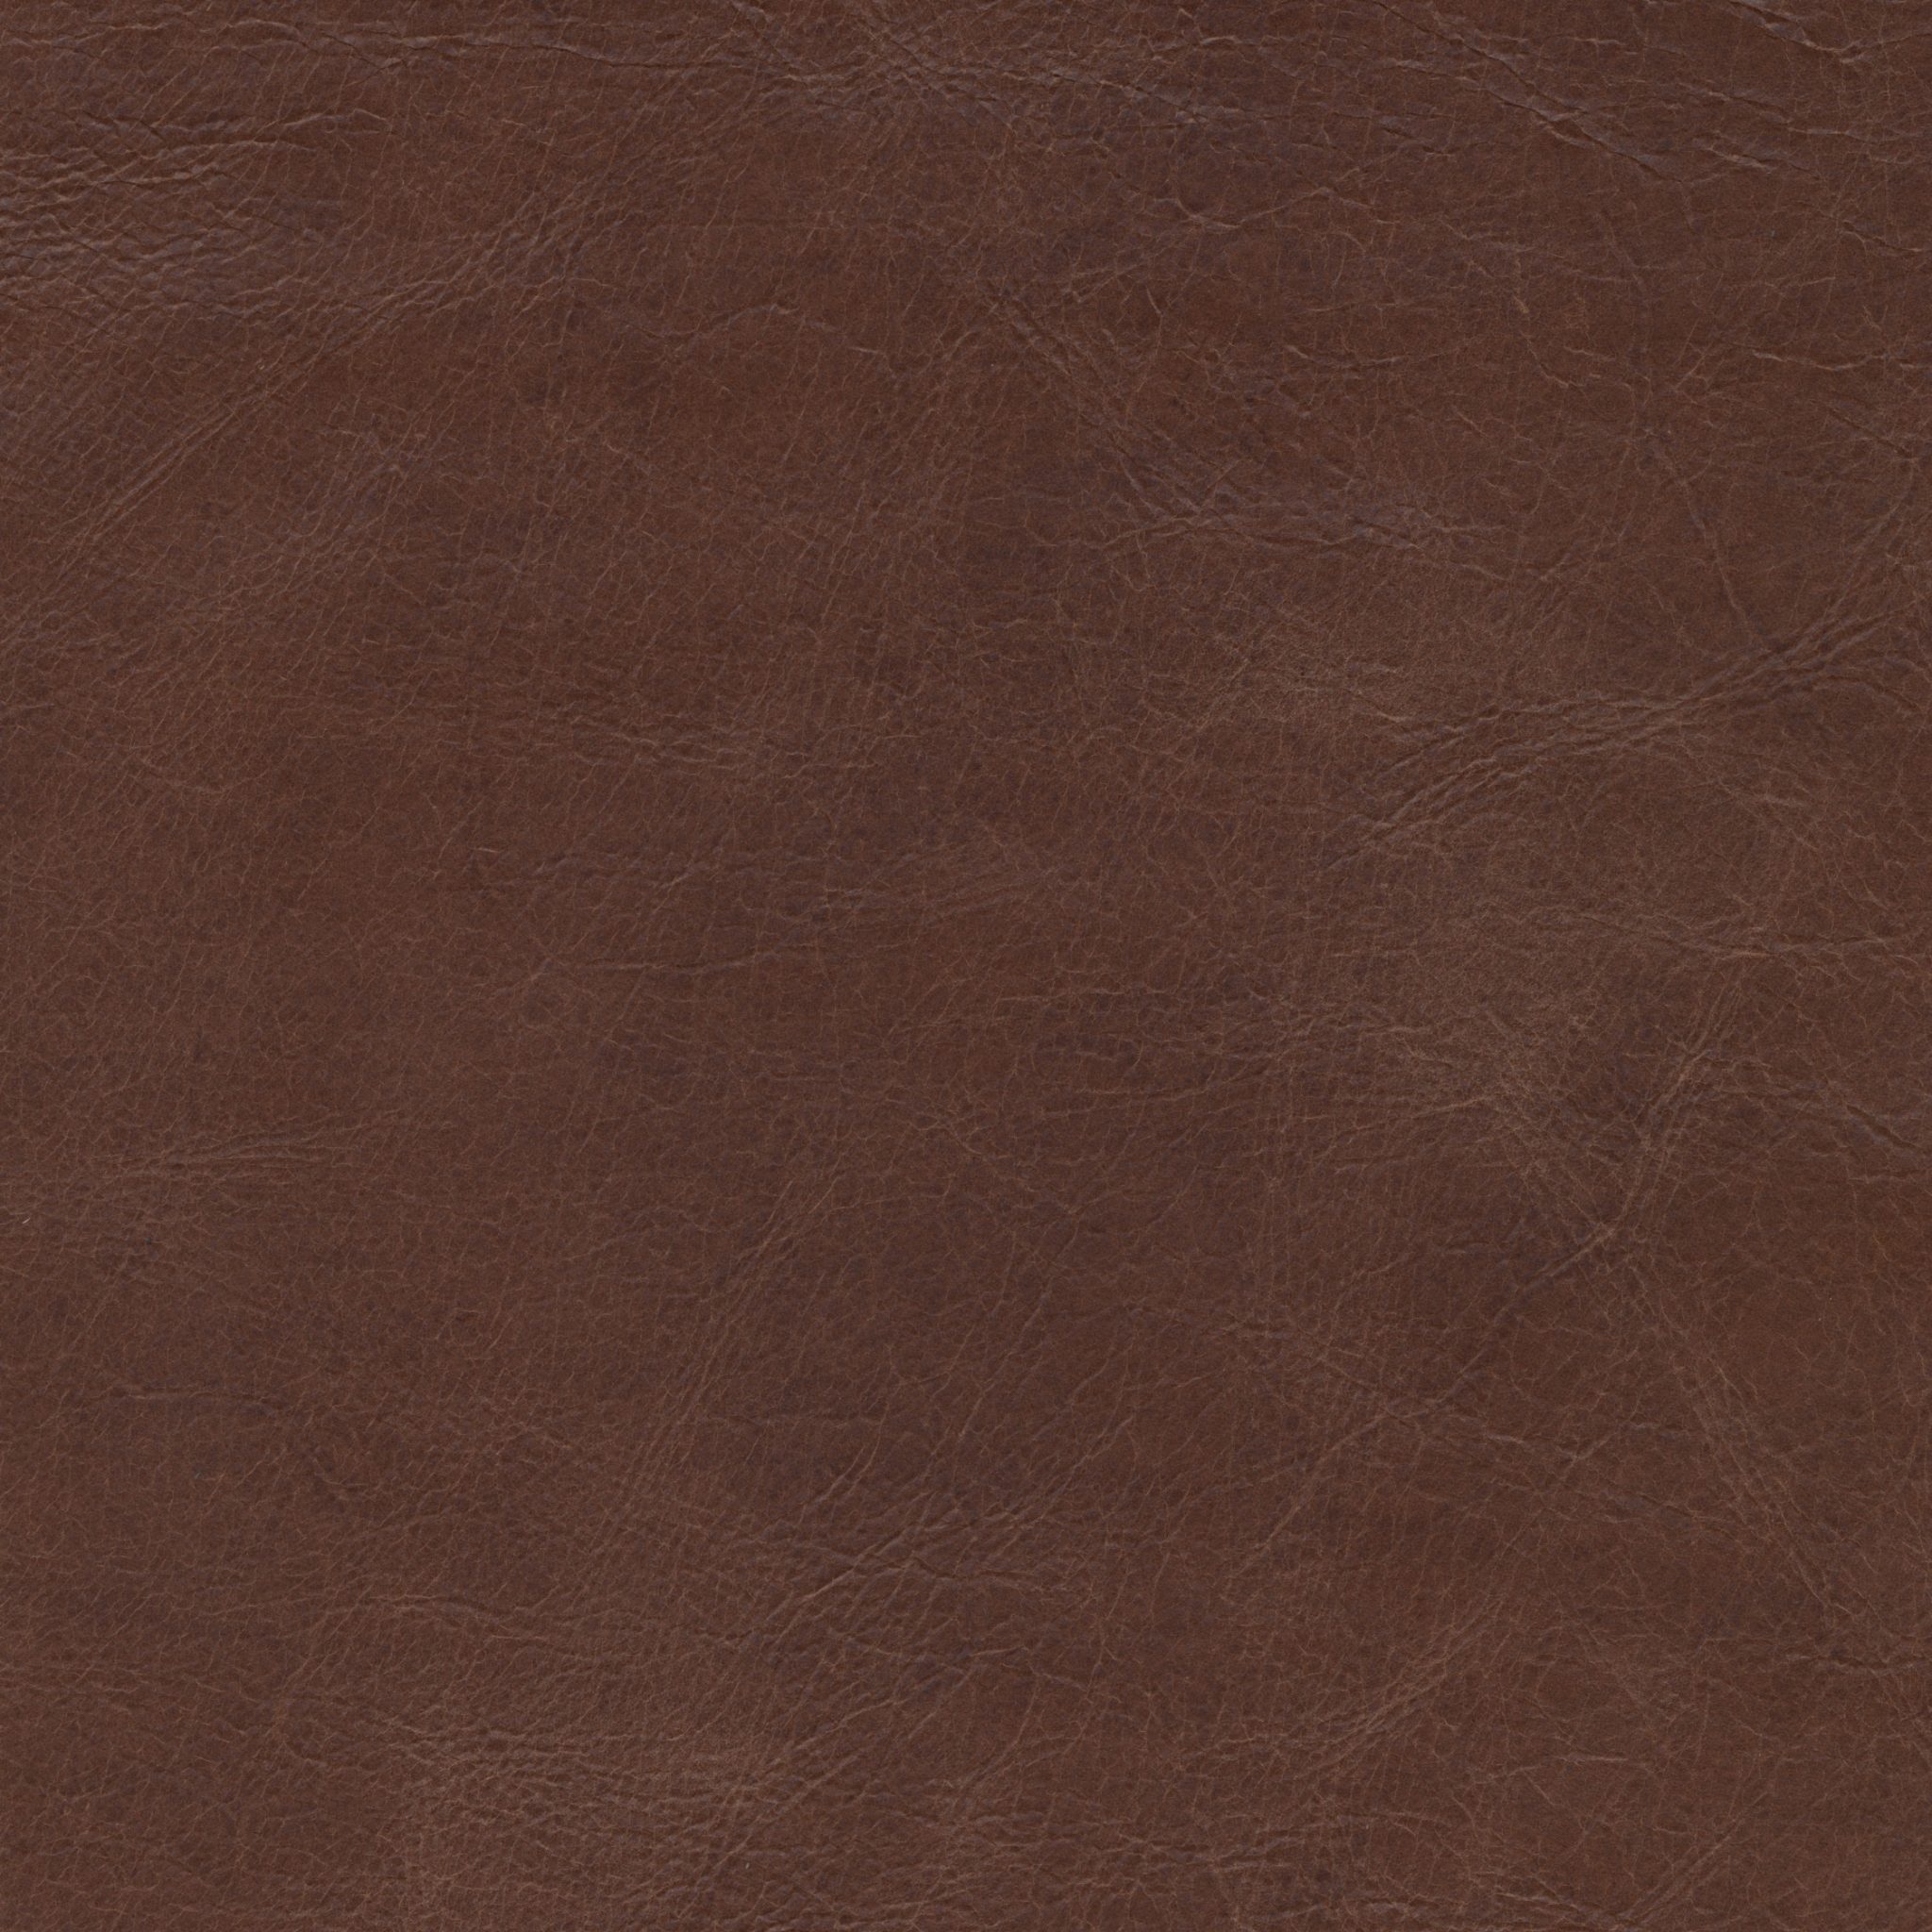 Trends Coffee - Leather Swatch